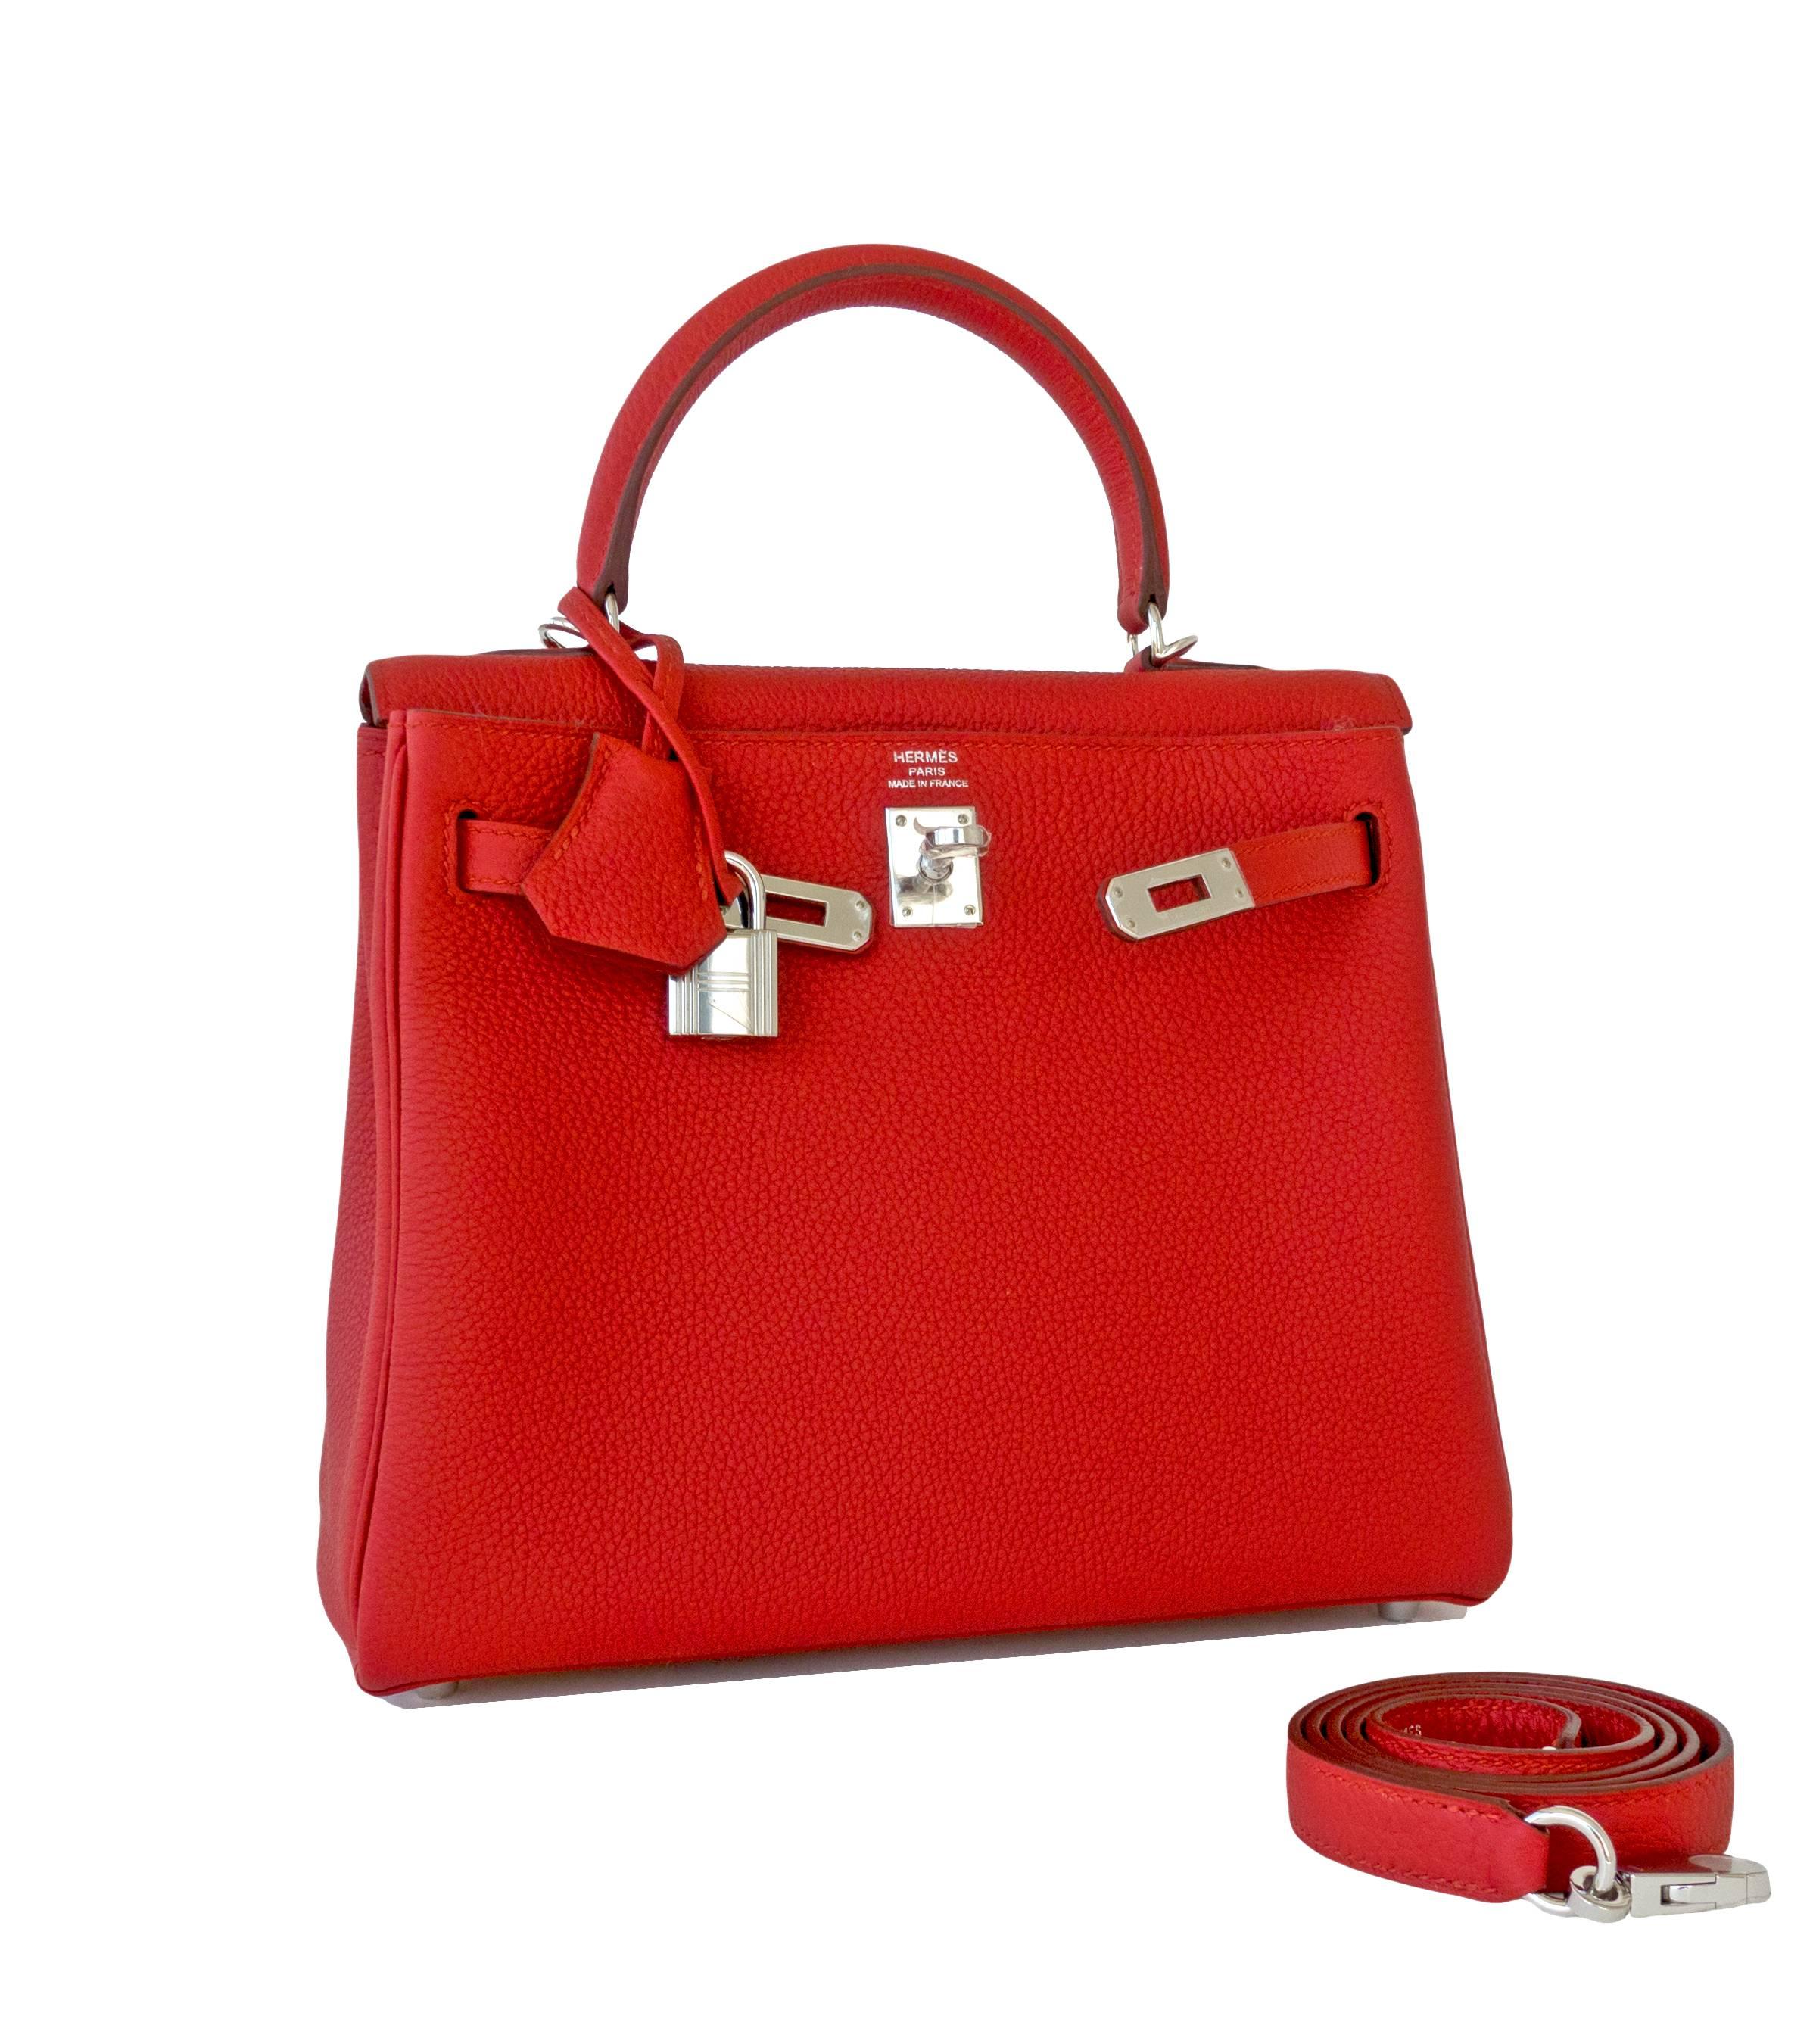 Hermes Vermillion 25cm Lipstick Red Togo Mini Kelly Bag Palladium Rare Jewel 
Brand New in Box. T stamp. Store fresh.
Comes full set with keys, lock, clochette, sleeper, rain protector, felt protective cover, Hermes box and ribbon.
Here it is- a